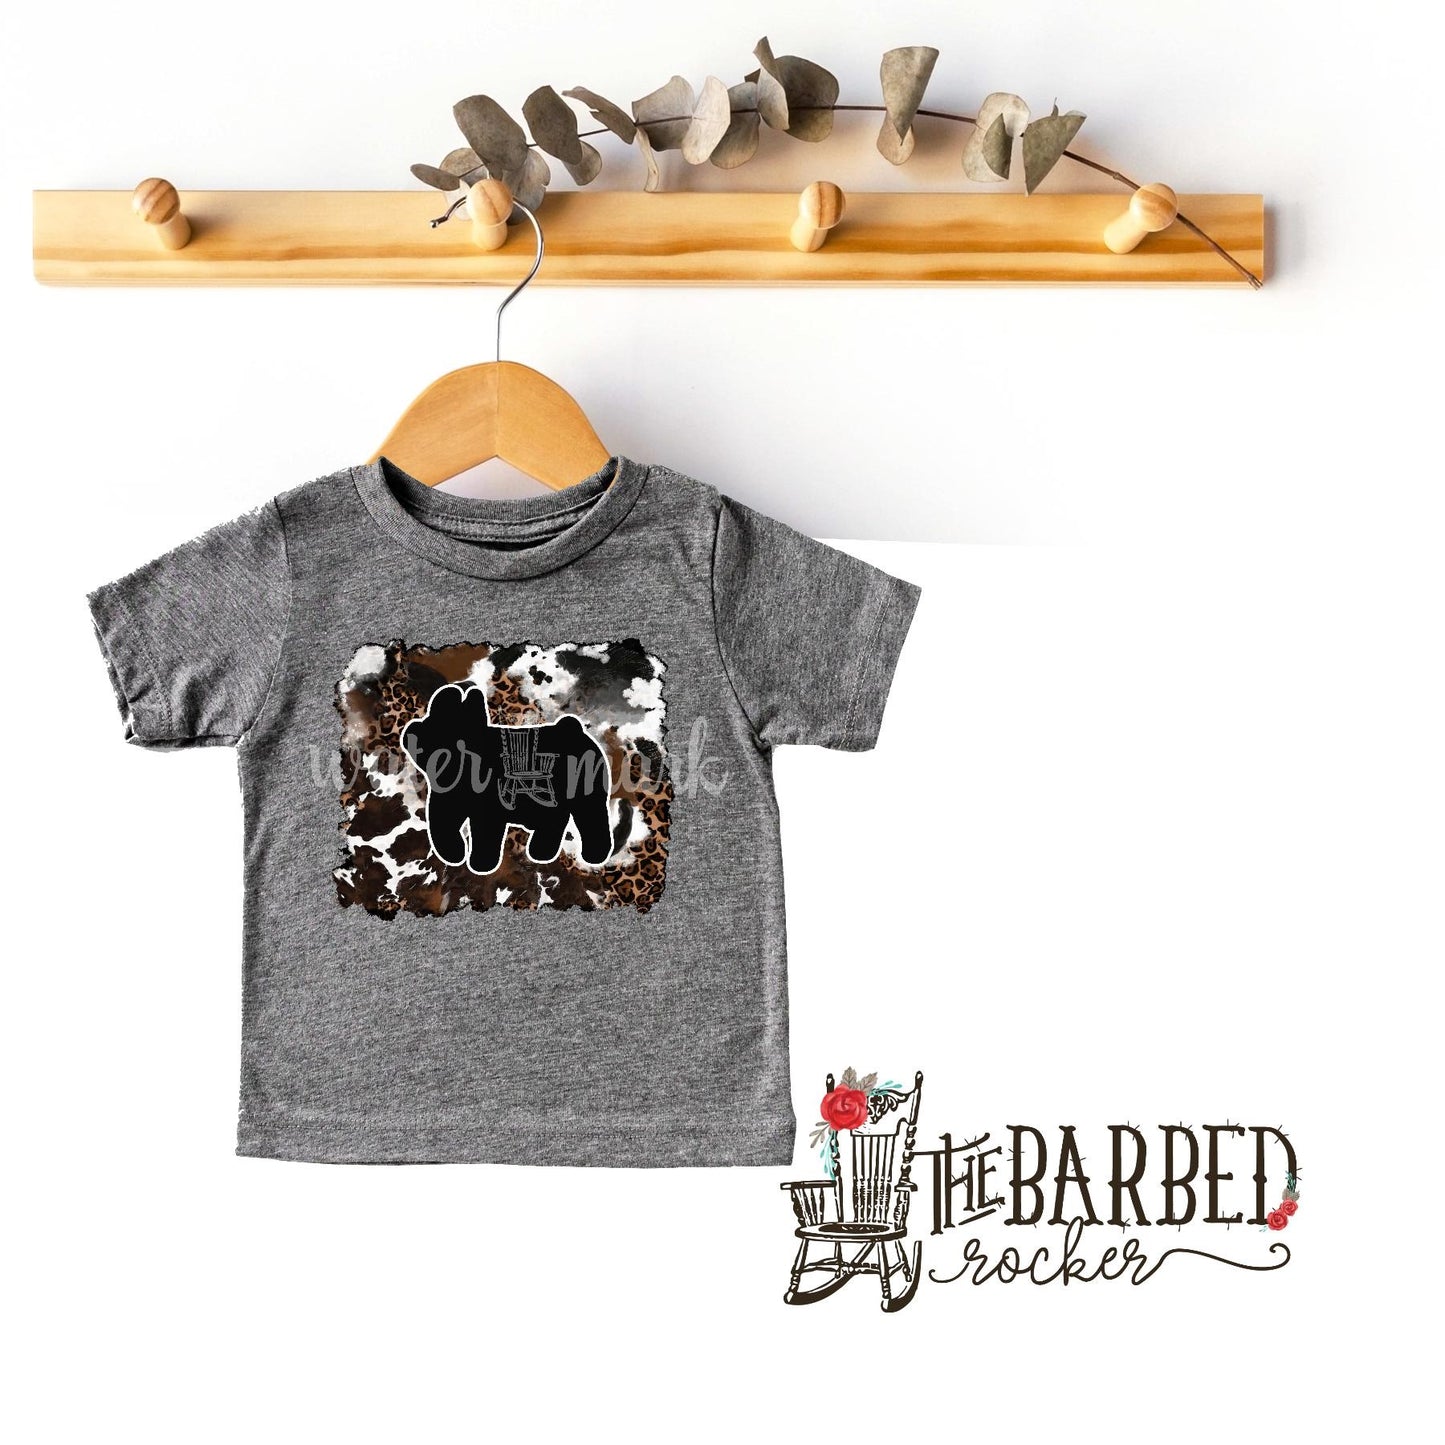 Toddler Cowhide Background Stockshow T-Shirt Show Girl